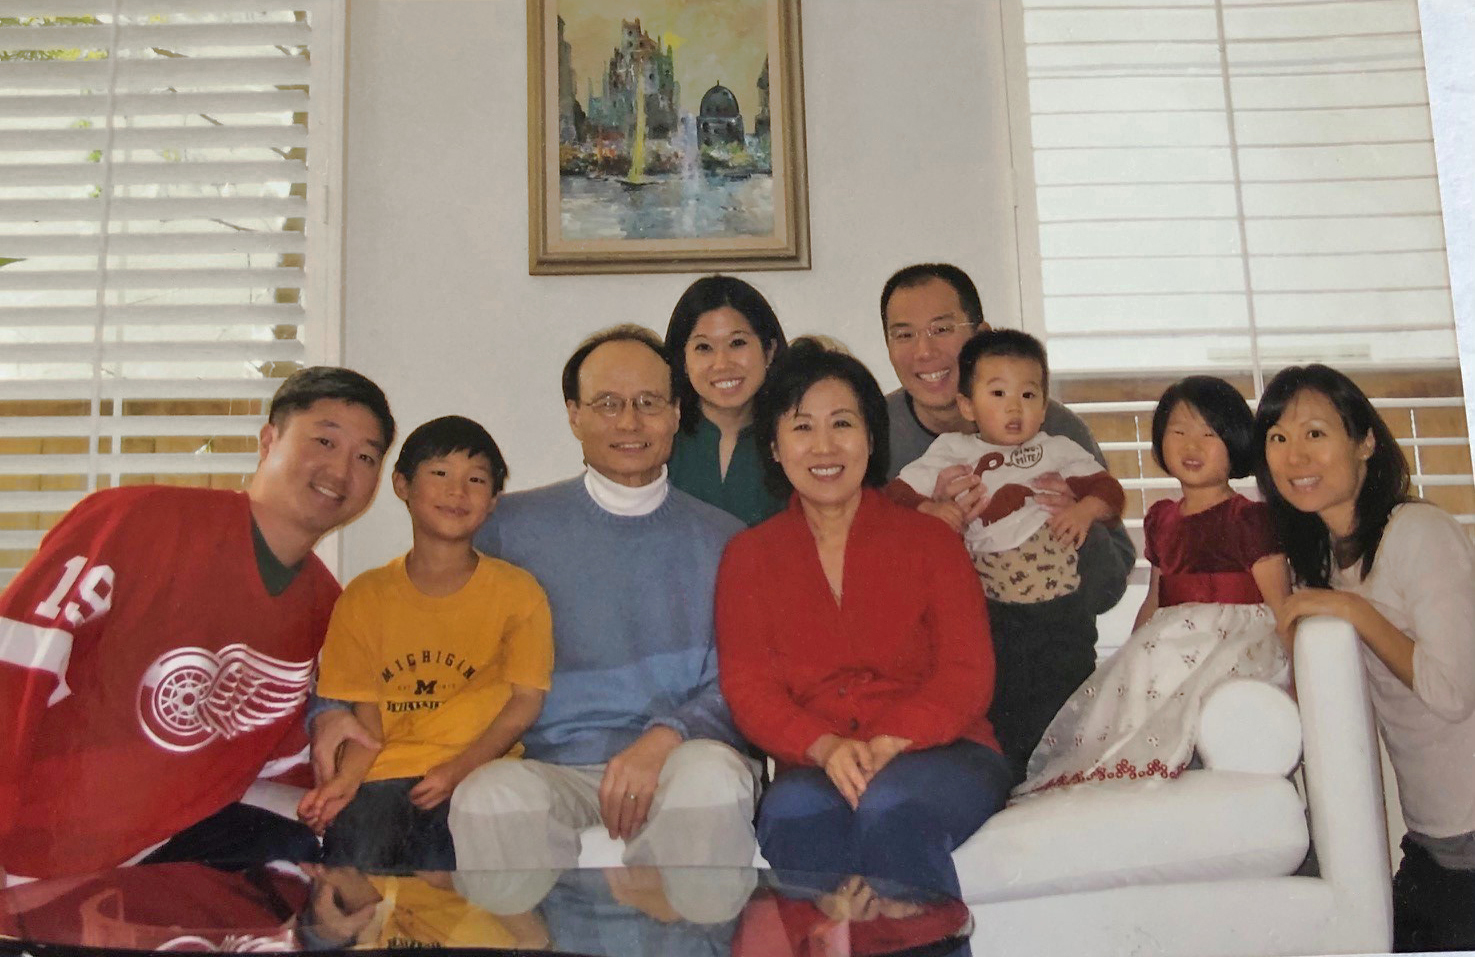 Chang family photo in living room